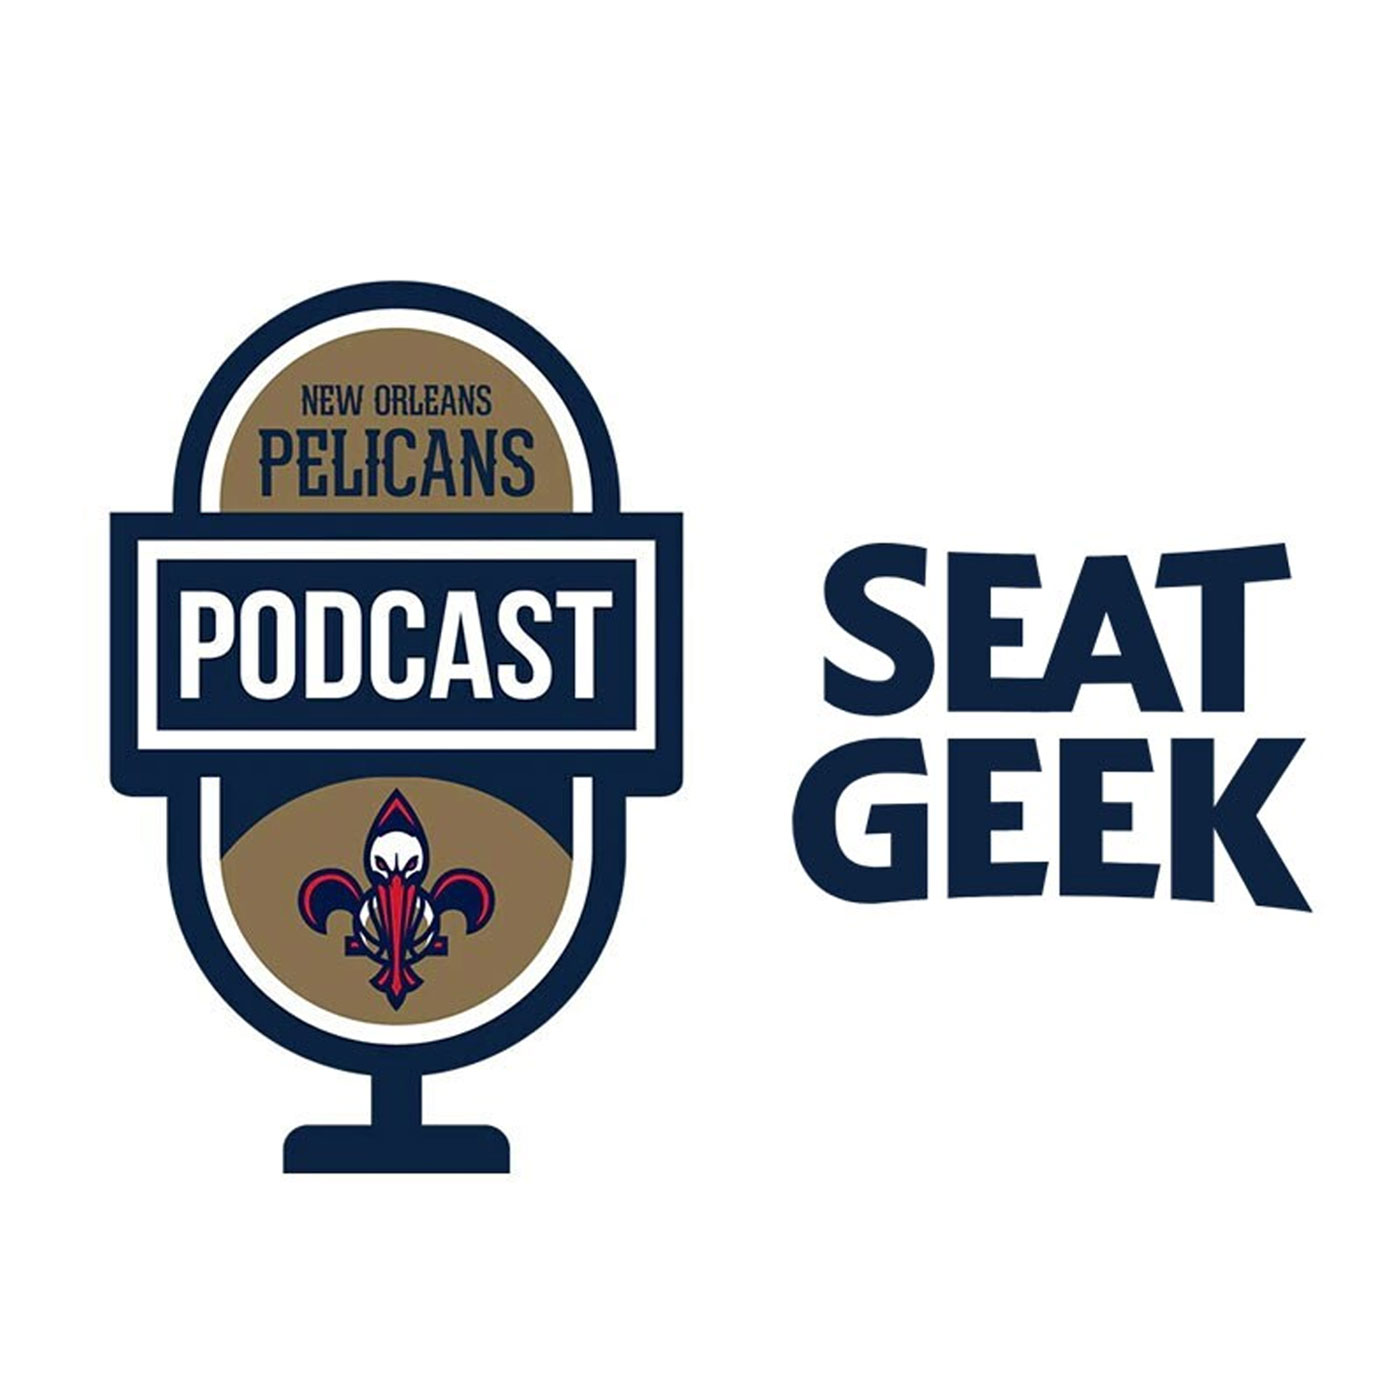 Allie LaForce on the New Orleans Pelicans Podcast presented by SeatGeek - April 19, 2022